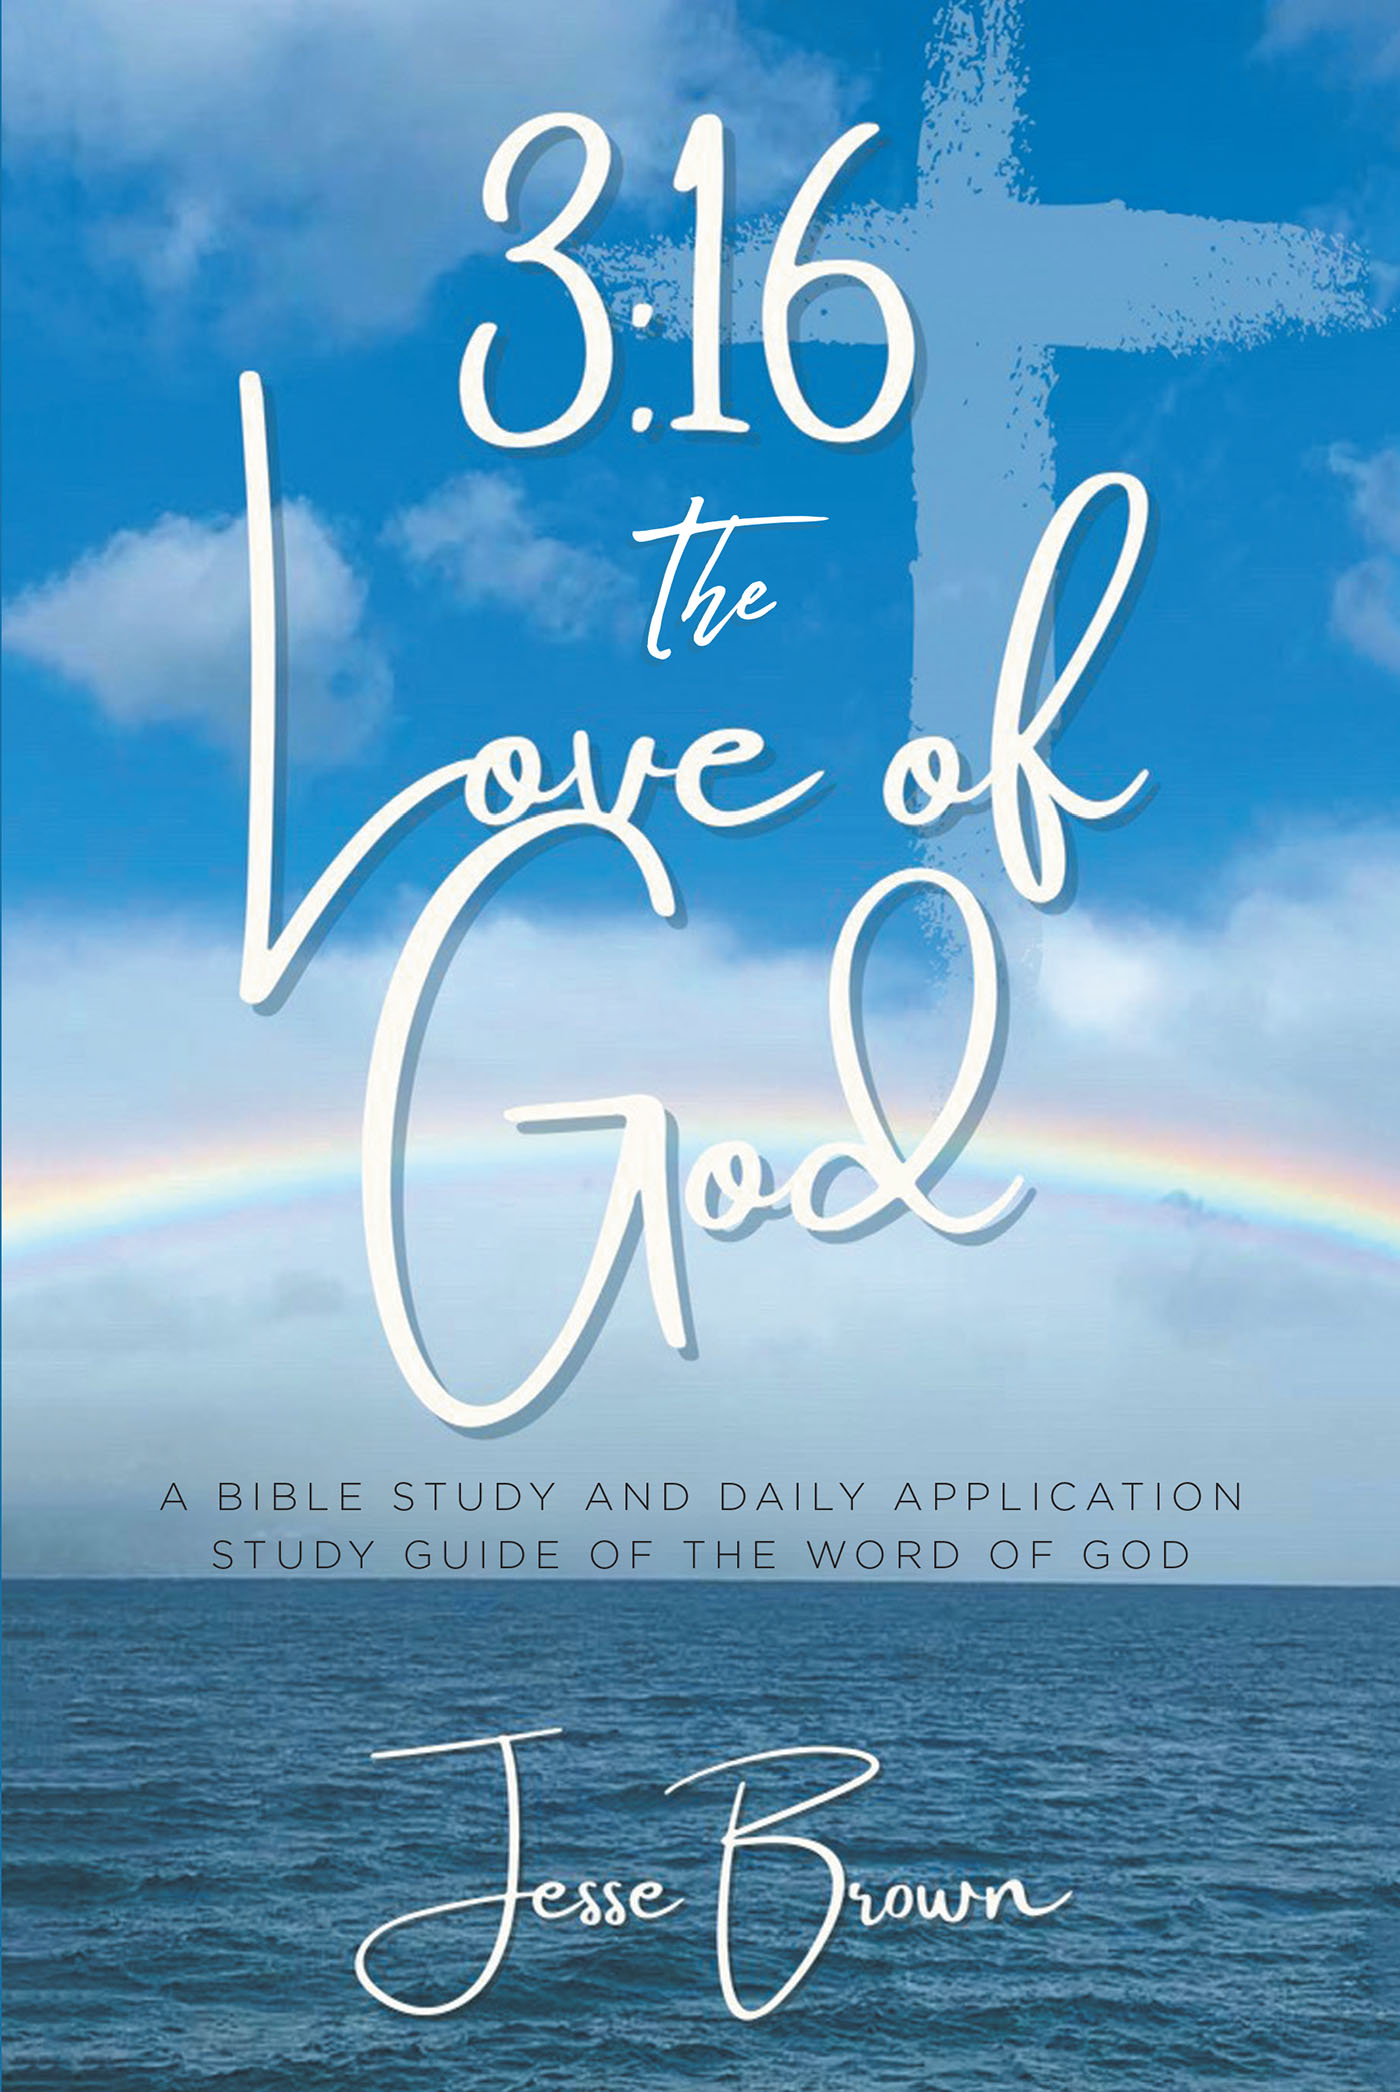 Jesse Brown's Newly Released “3:16 The Love of God: A Bible Study and Daily Application Study Guide of the Word of God” is an Engrossing Resource for Spiritual Recharge